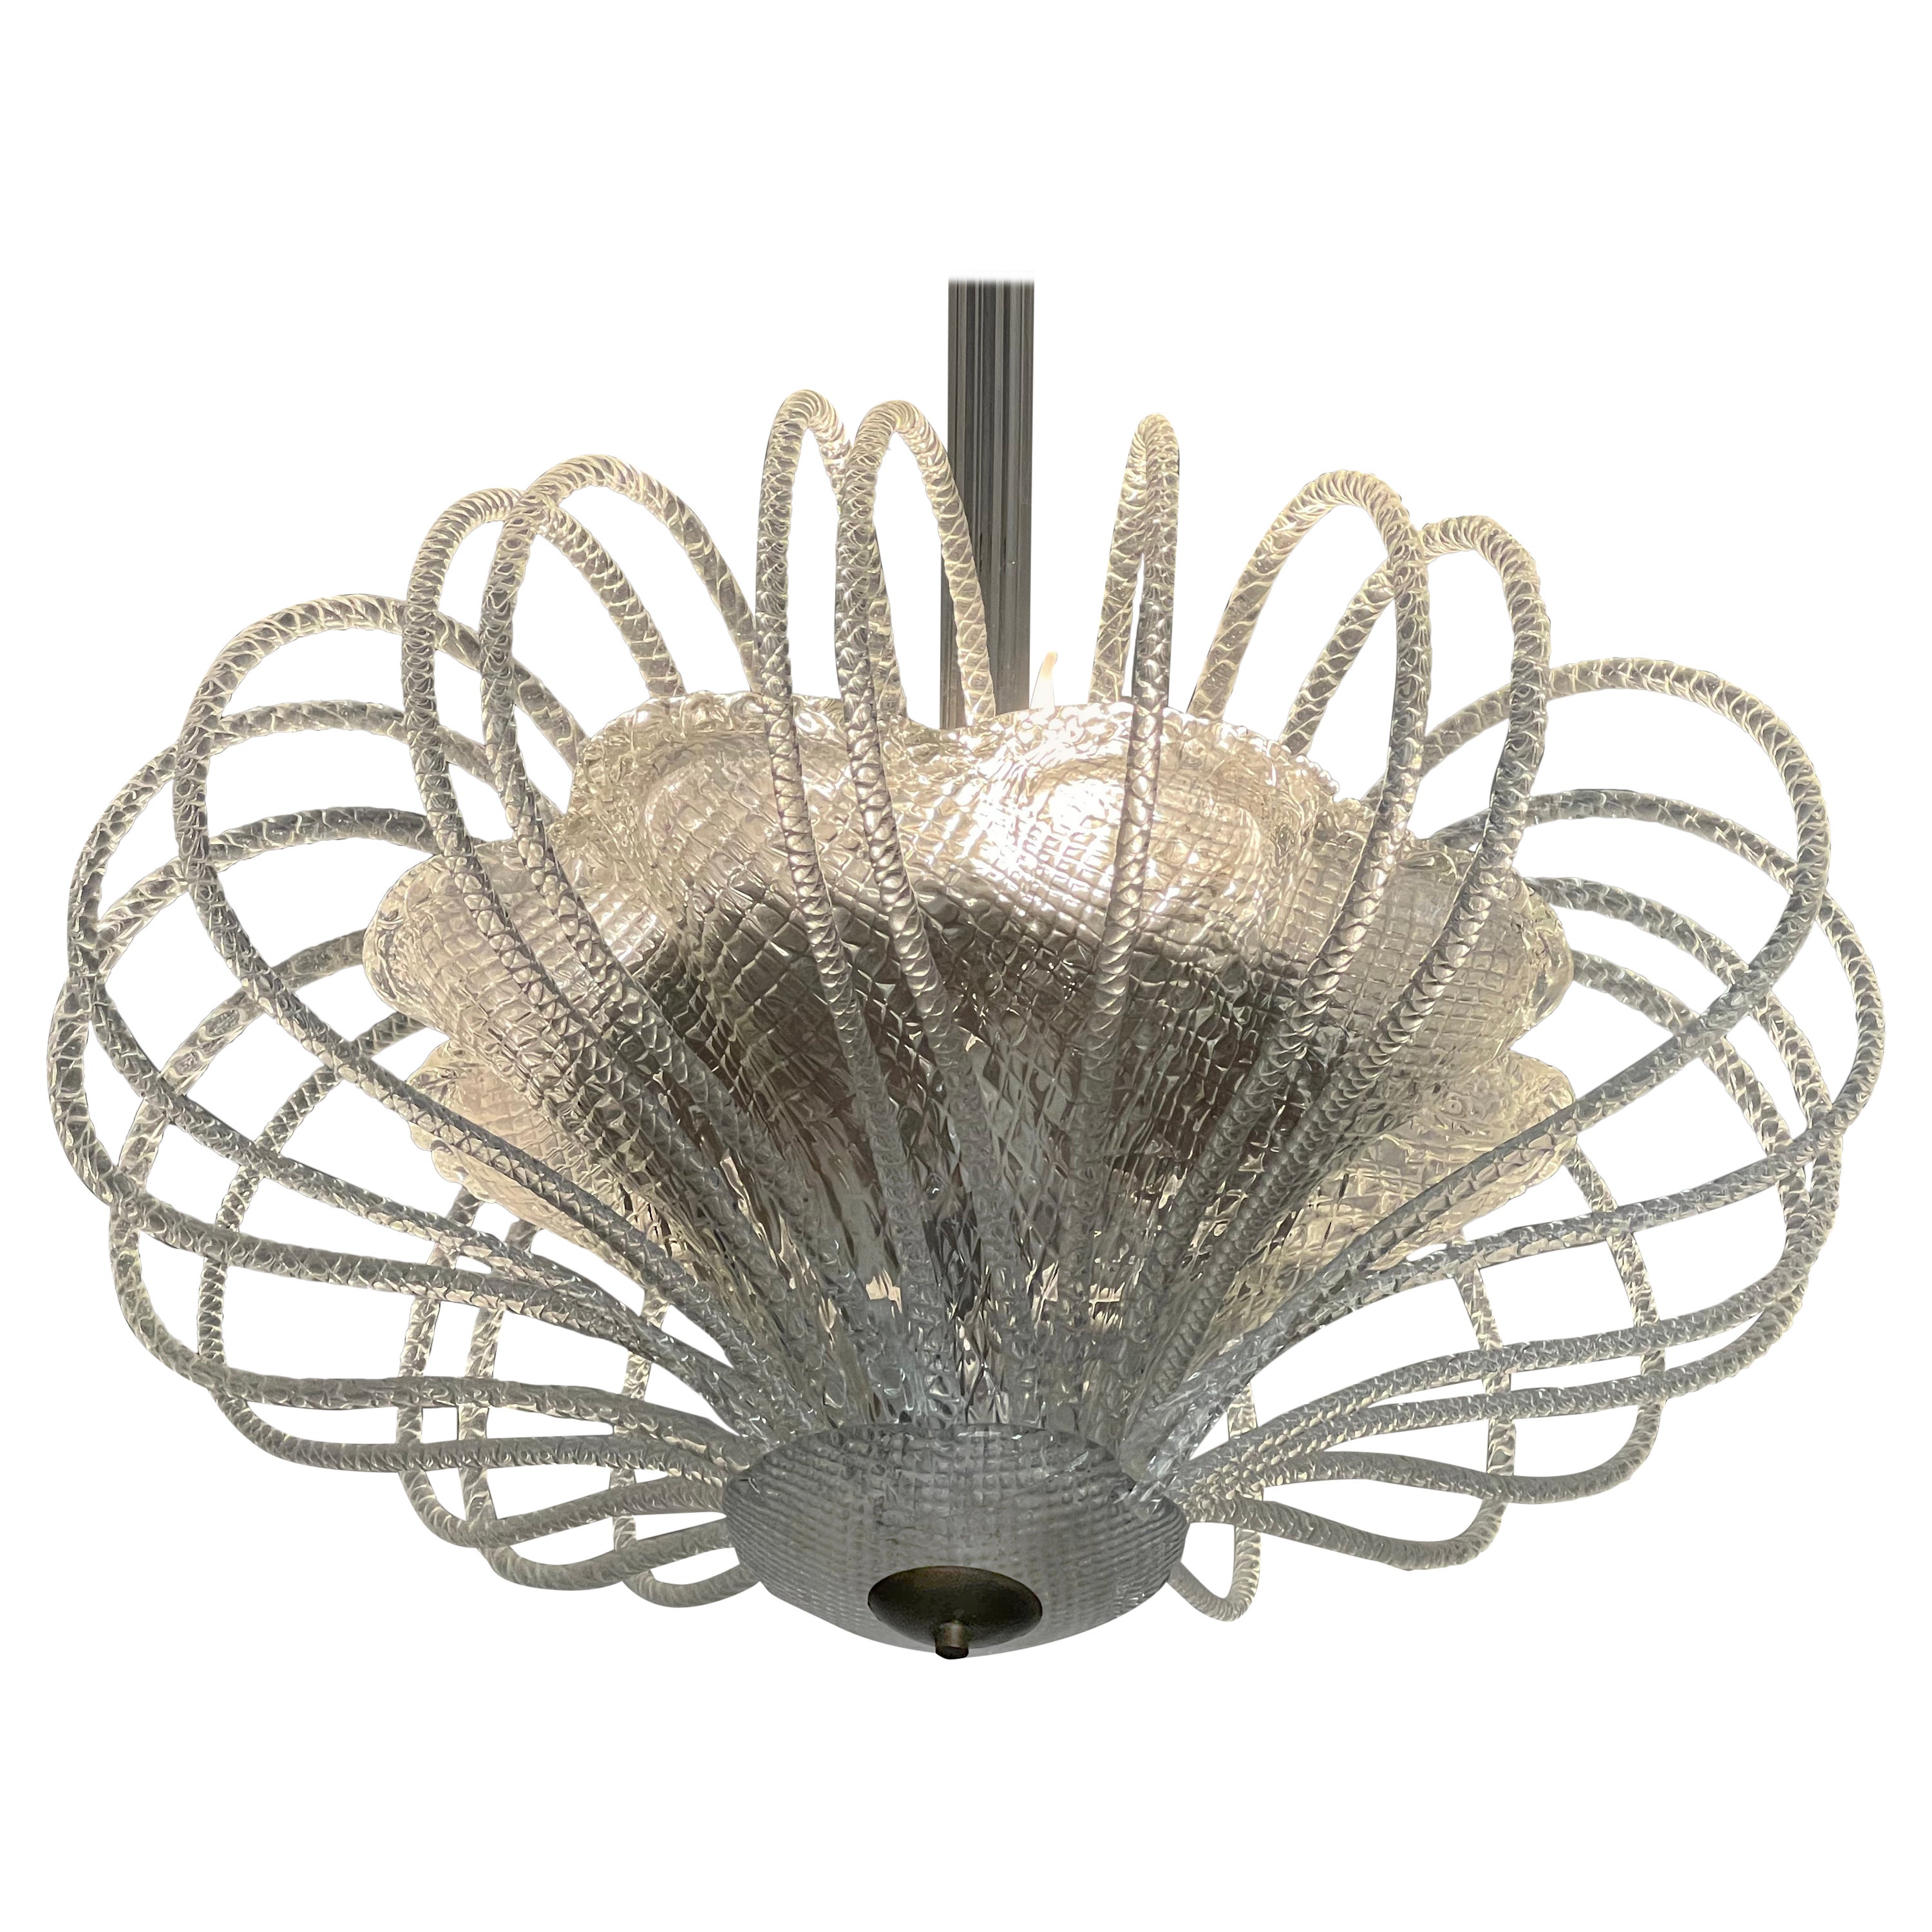 Stunning and Original Chandelier by Barovier & Toso, Murano, 1940s For Sale